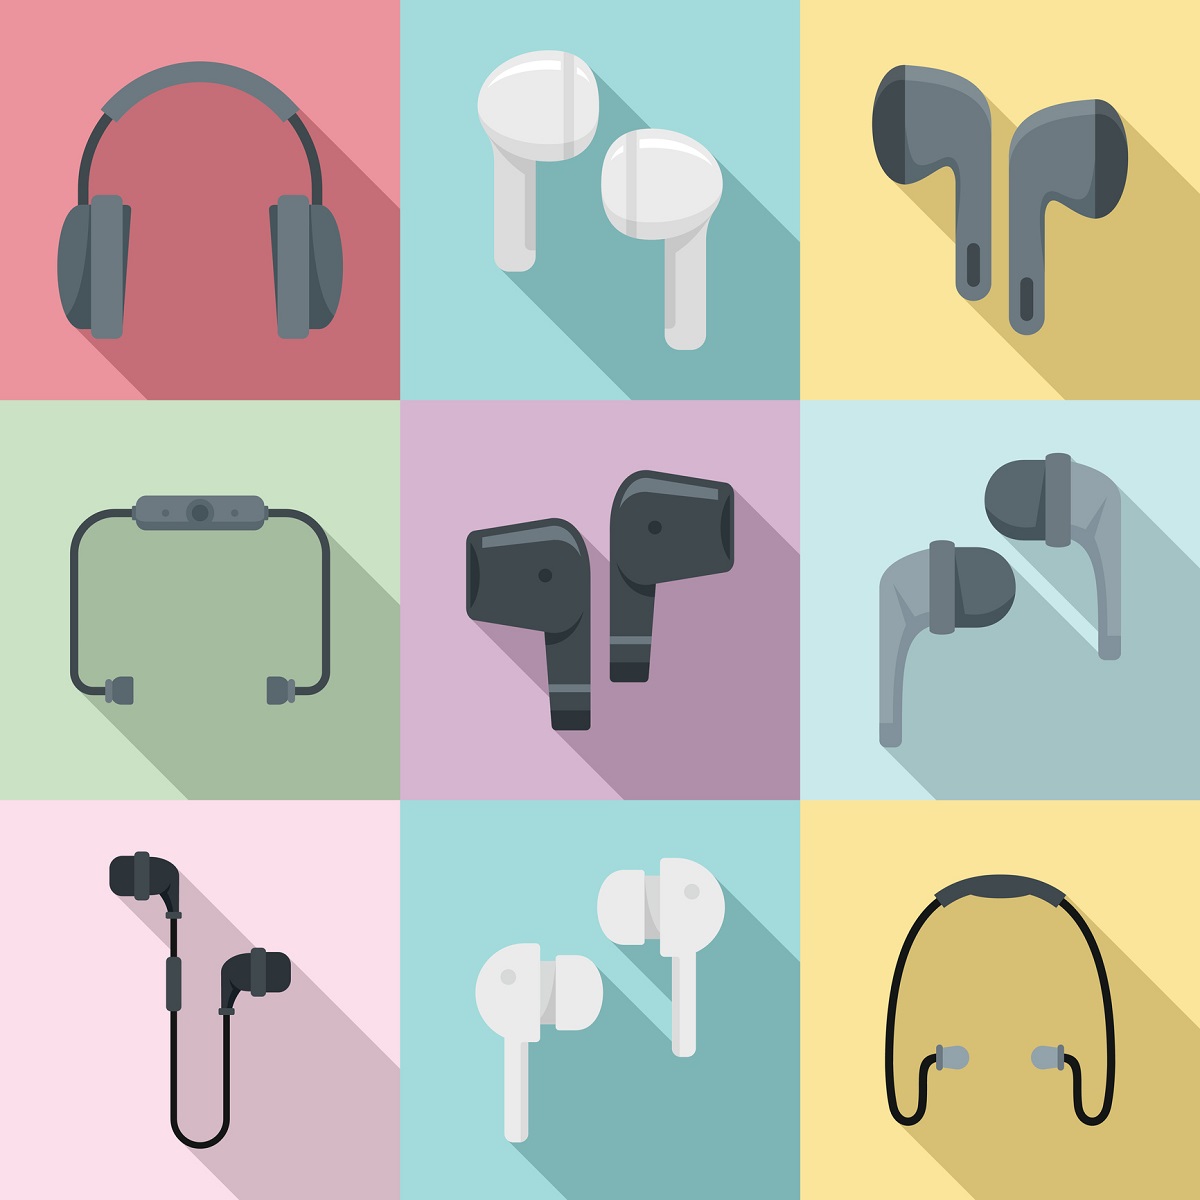 Nine coloured icons of various types of earbuds that could be vulnerable to bluetooth headphone hacking